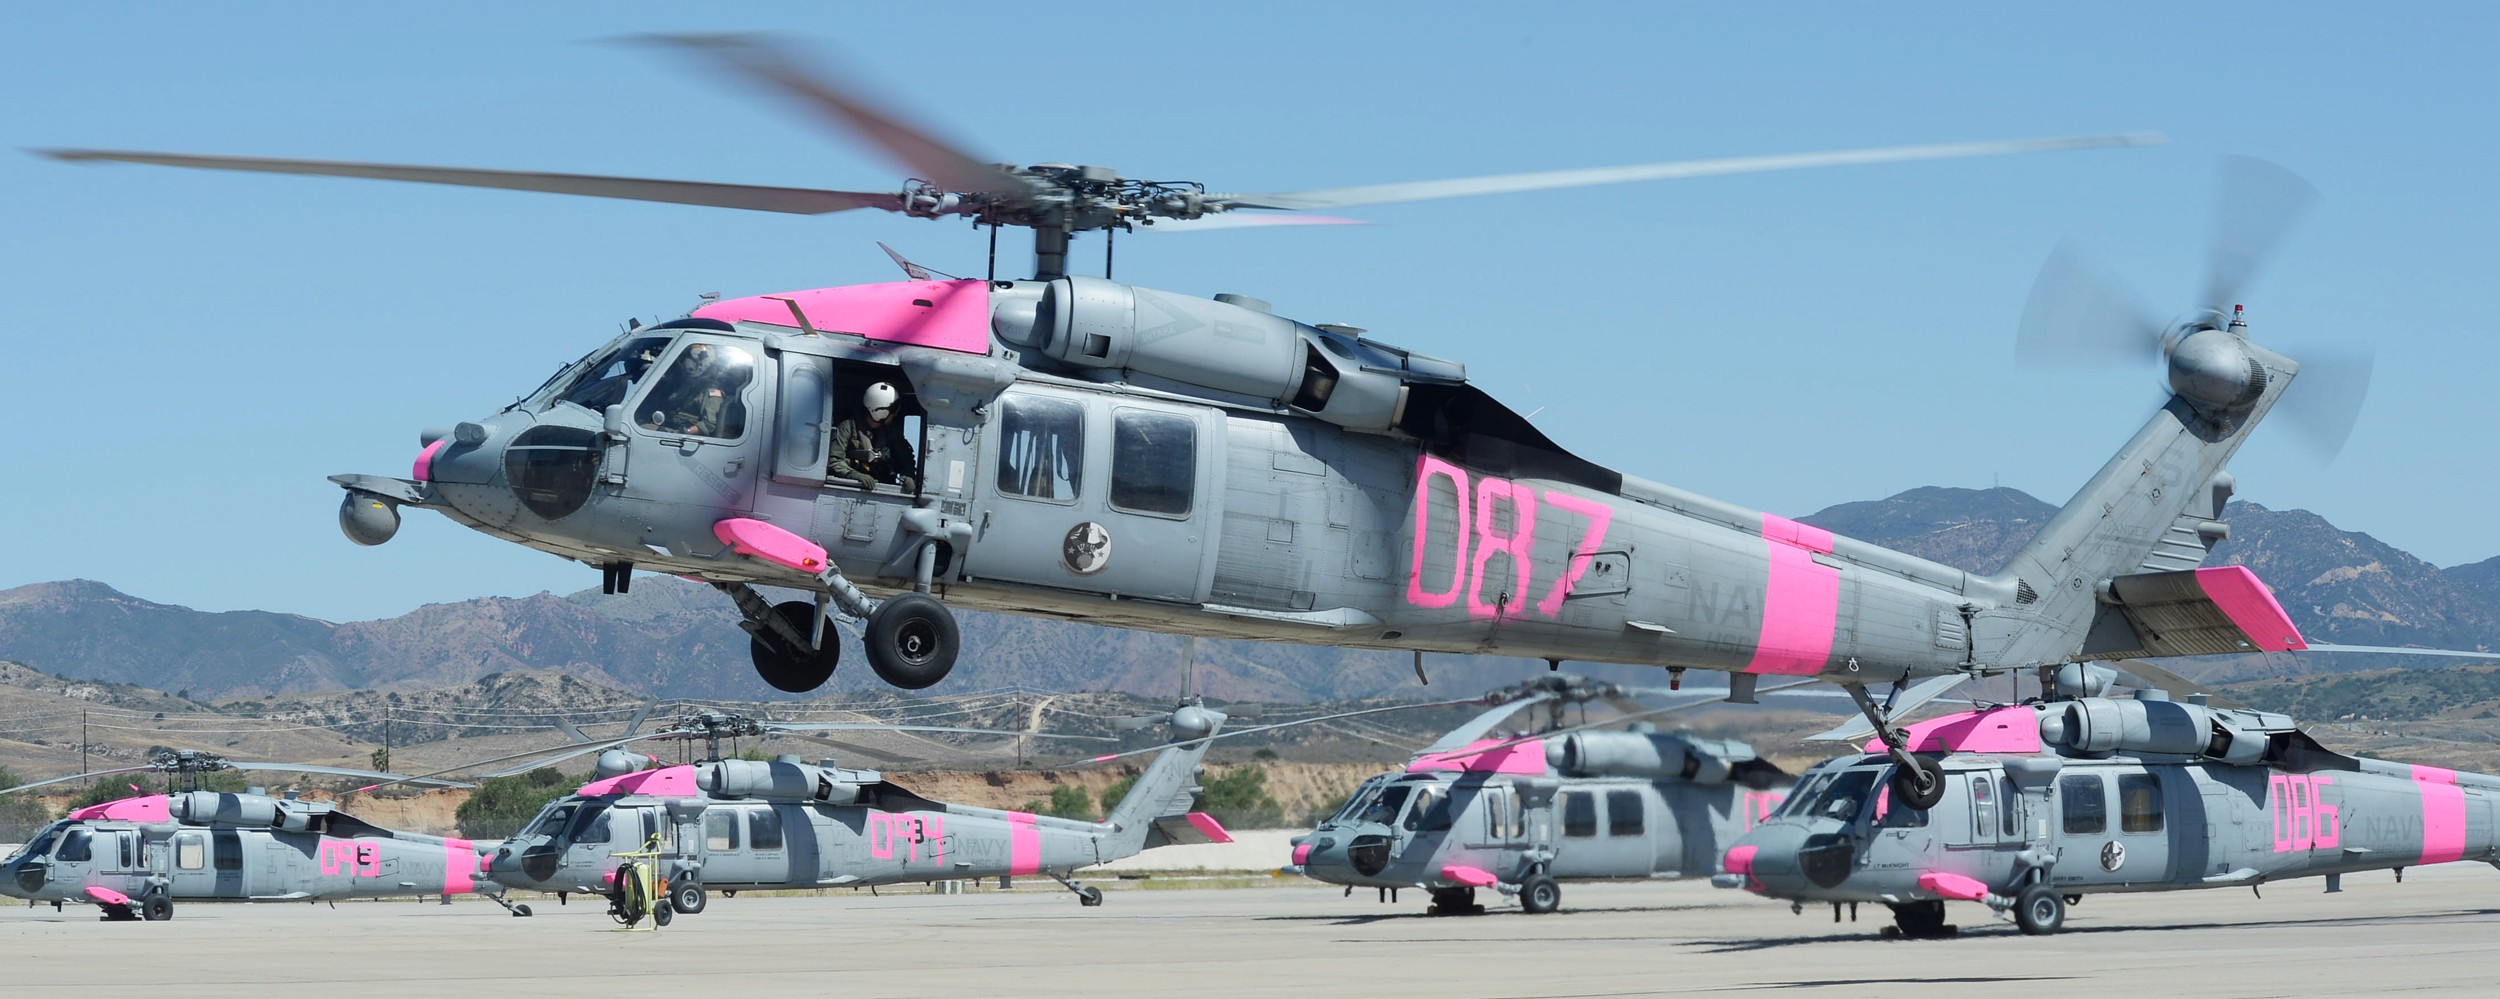 hsc-3 merlins helicopter sea combat squadron mh-60s seahawk us navy 2014 30